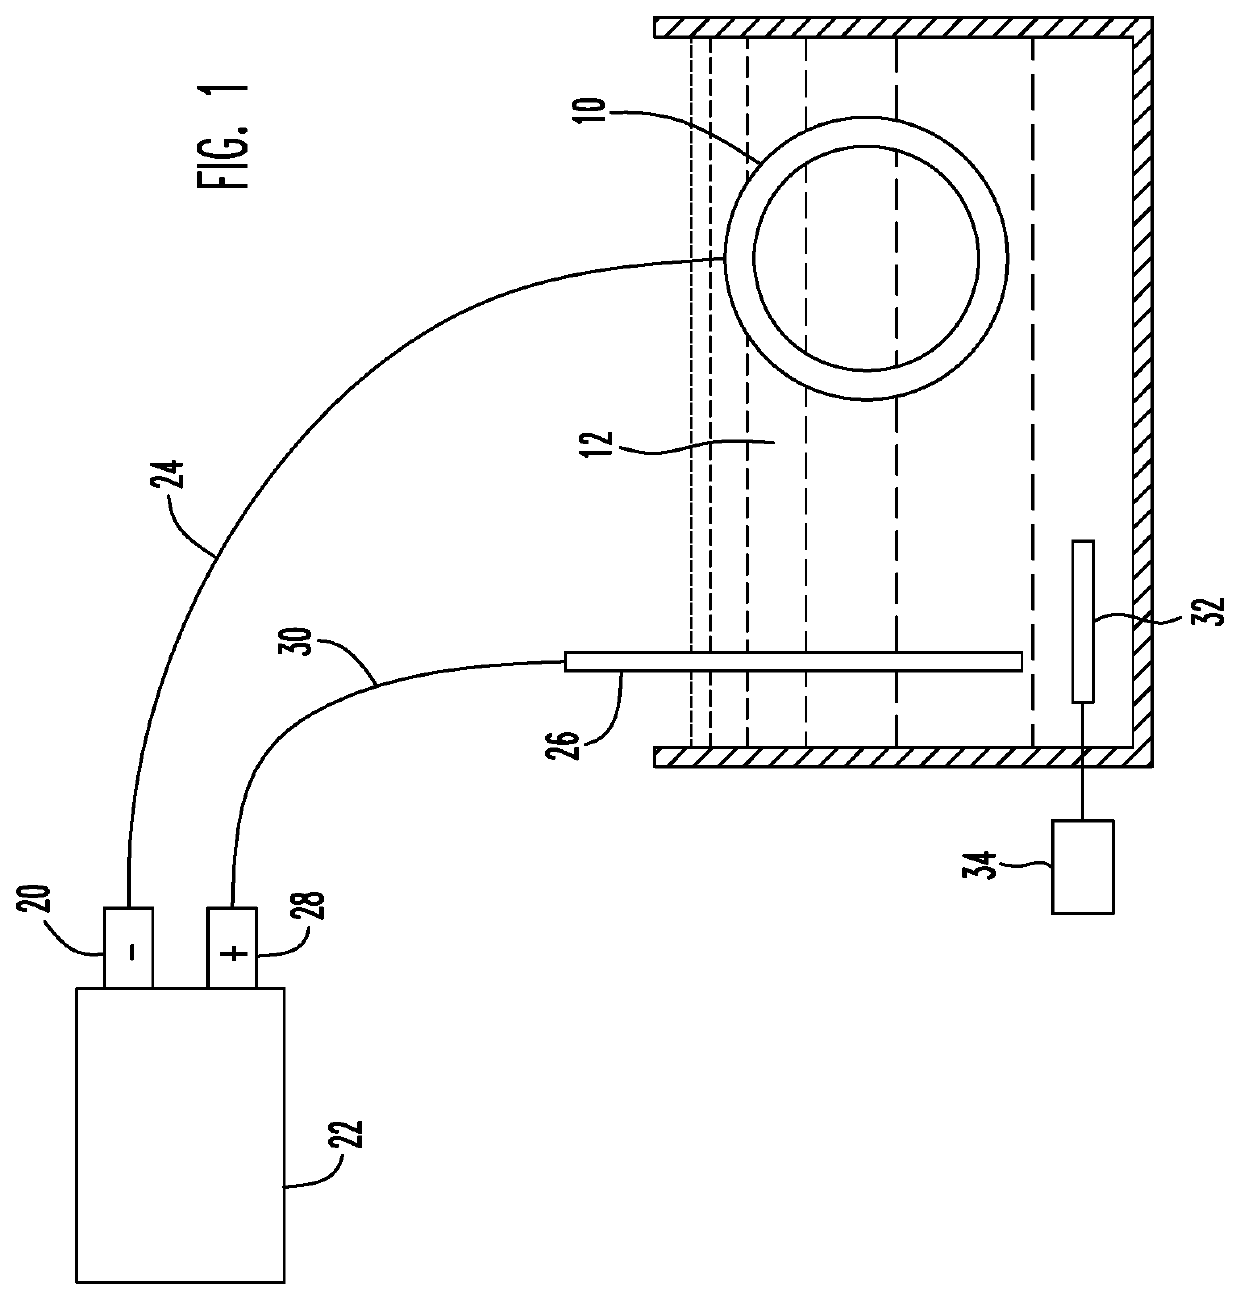 Method for electrolytic cleaning of aluminum